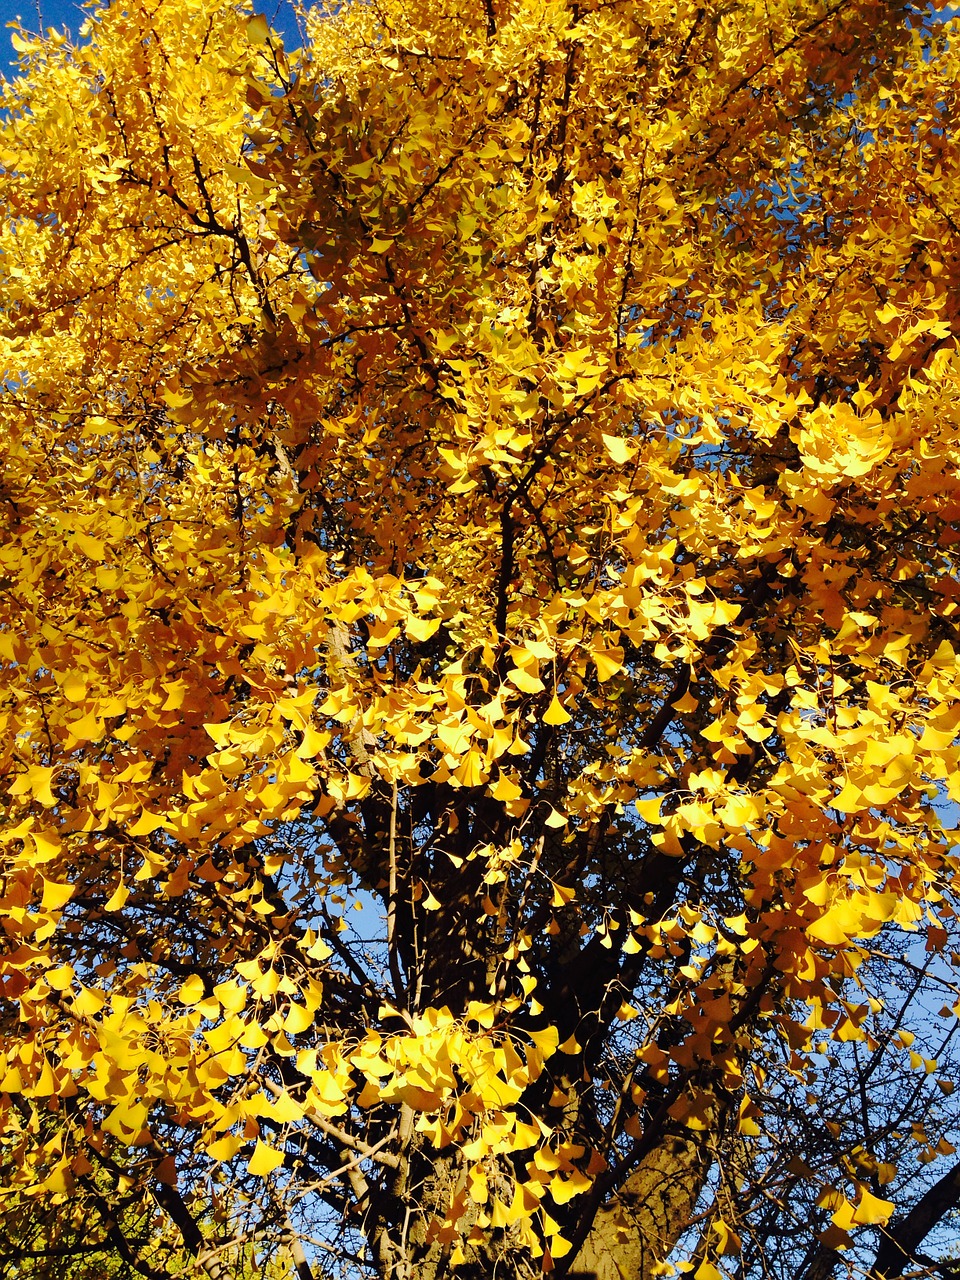 Edit free photo of Ginkgo,ginkgo trees,yellow ginkgo tree,free pictures ...